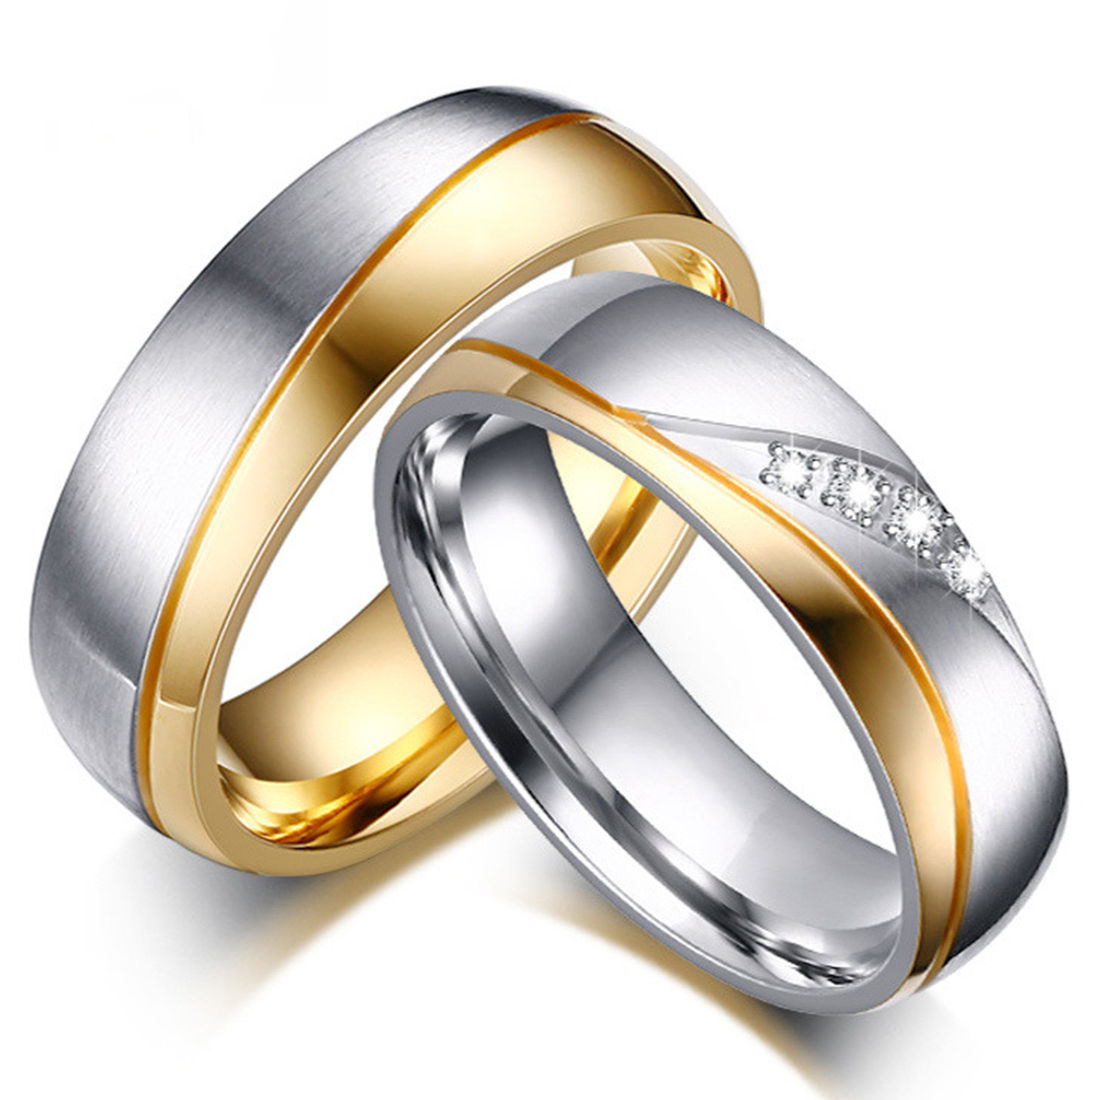 Shop Promise Rings for Him and Her | Kay